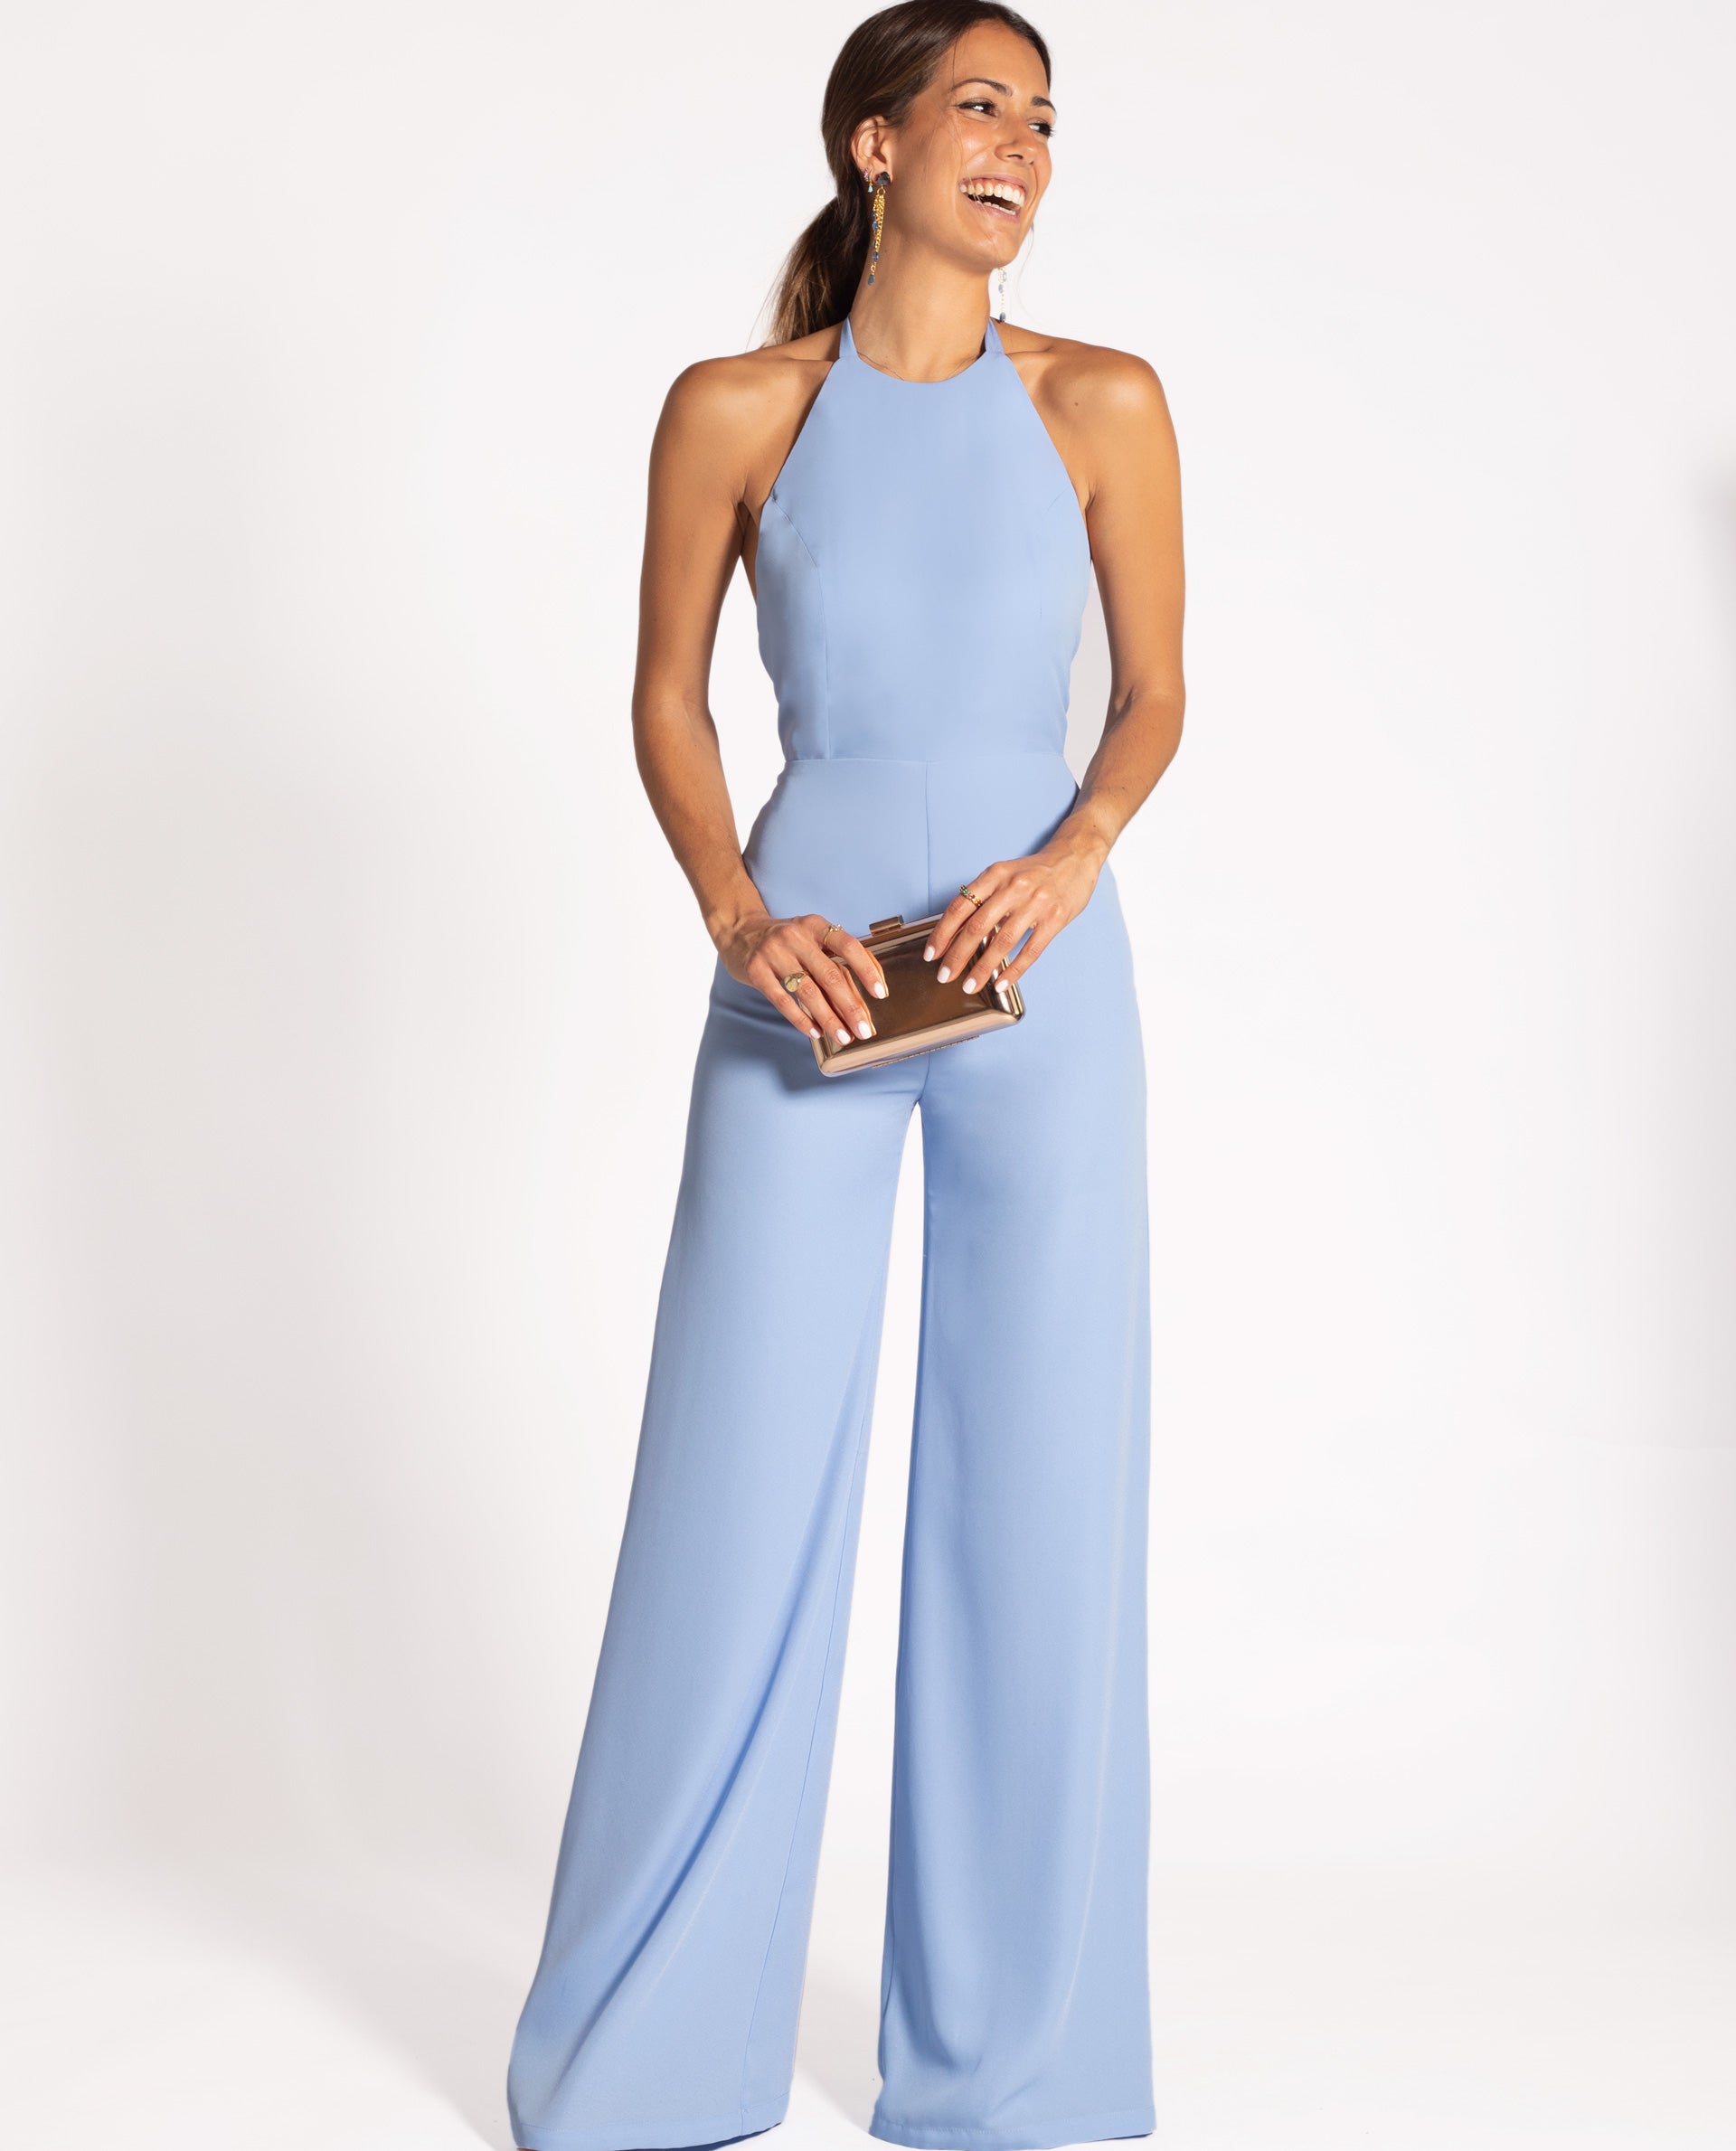 forma sufrimiento Mecánicamente Blue long jumpsuit with halter neckline and open back. THE-ARE